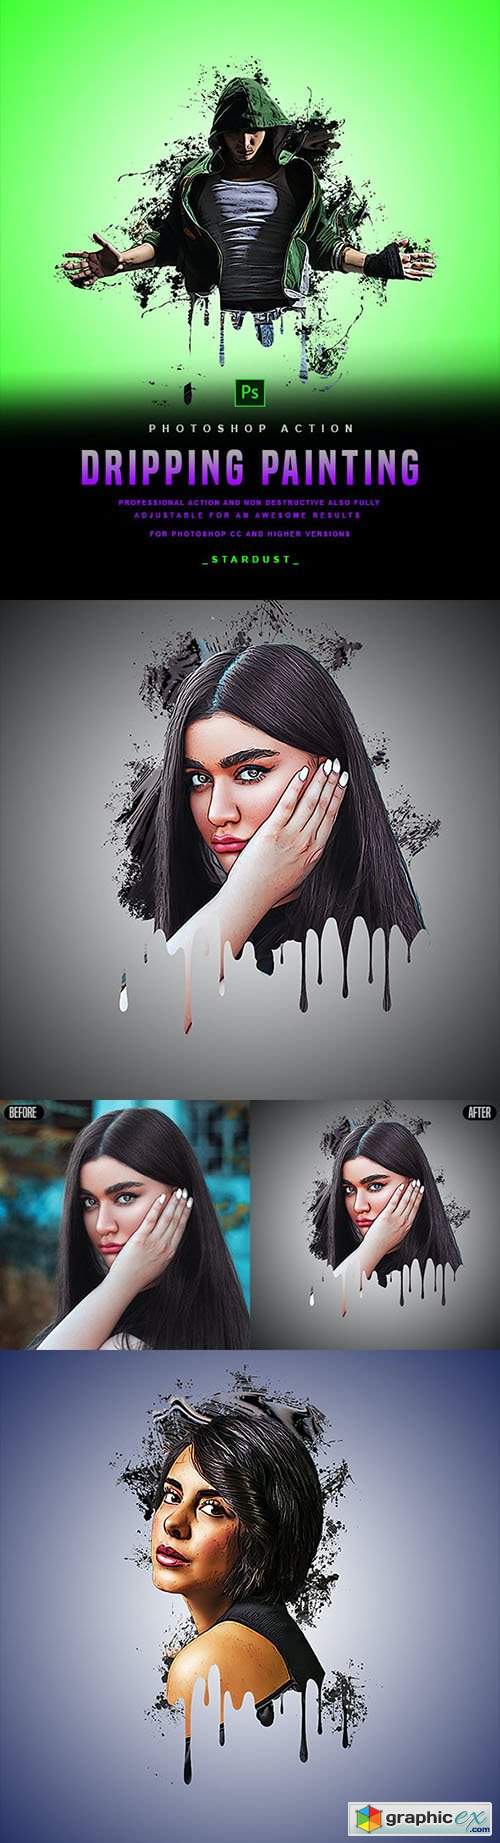 Dripping Painting - Photoshop Action 